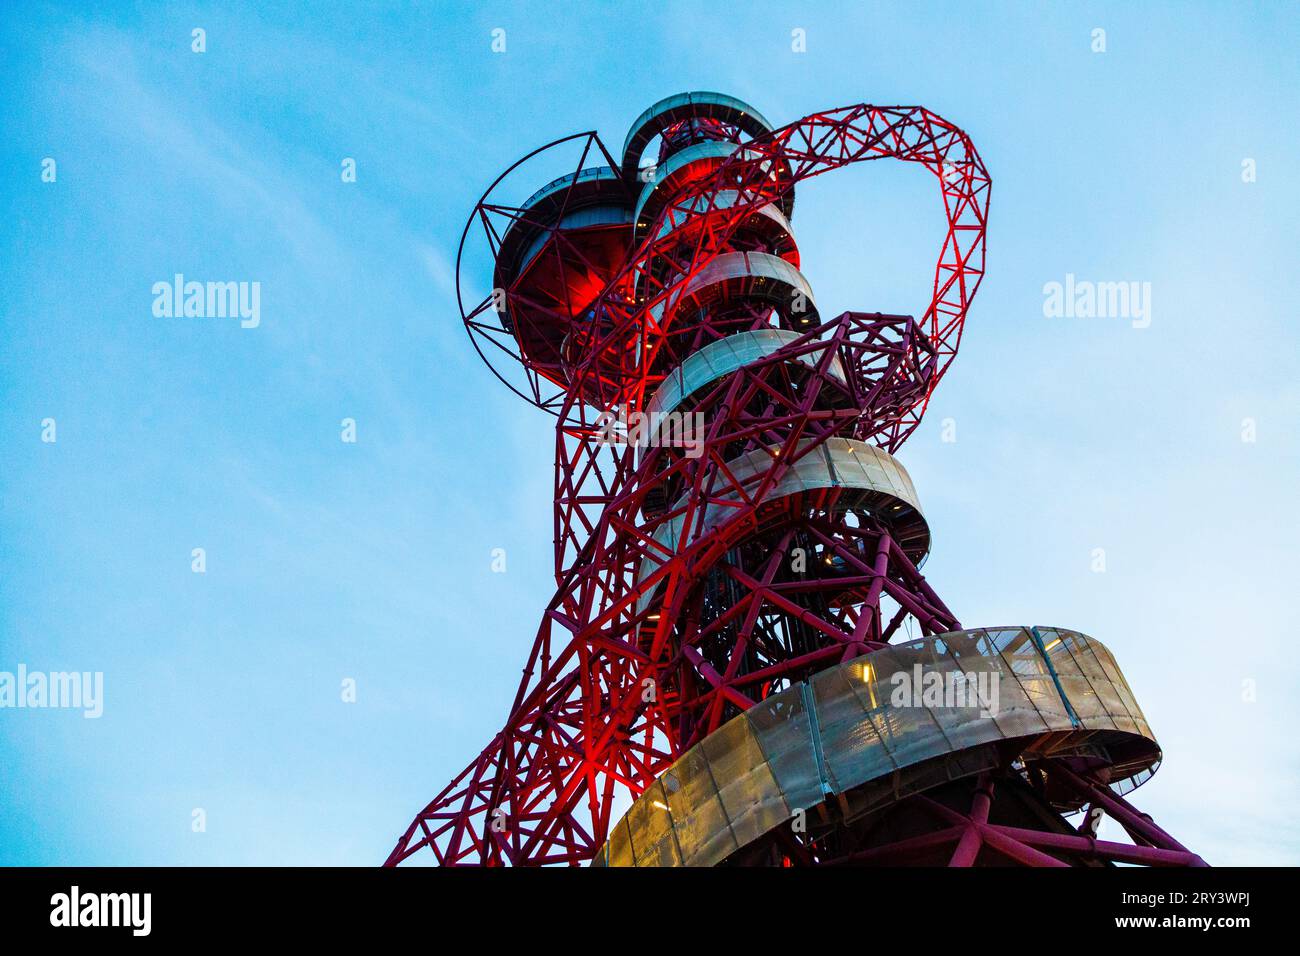 Arcelor Mittal Orbit by Anish Kapoor in the Olympic Village, London, England Stock Photo